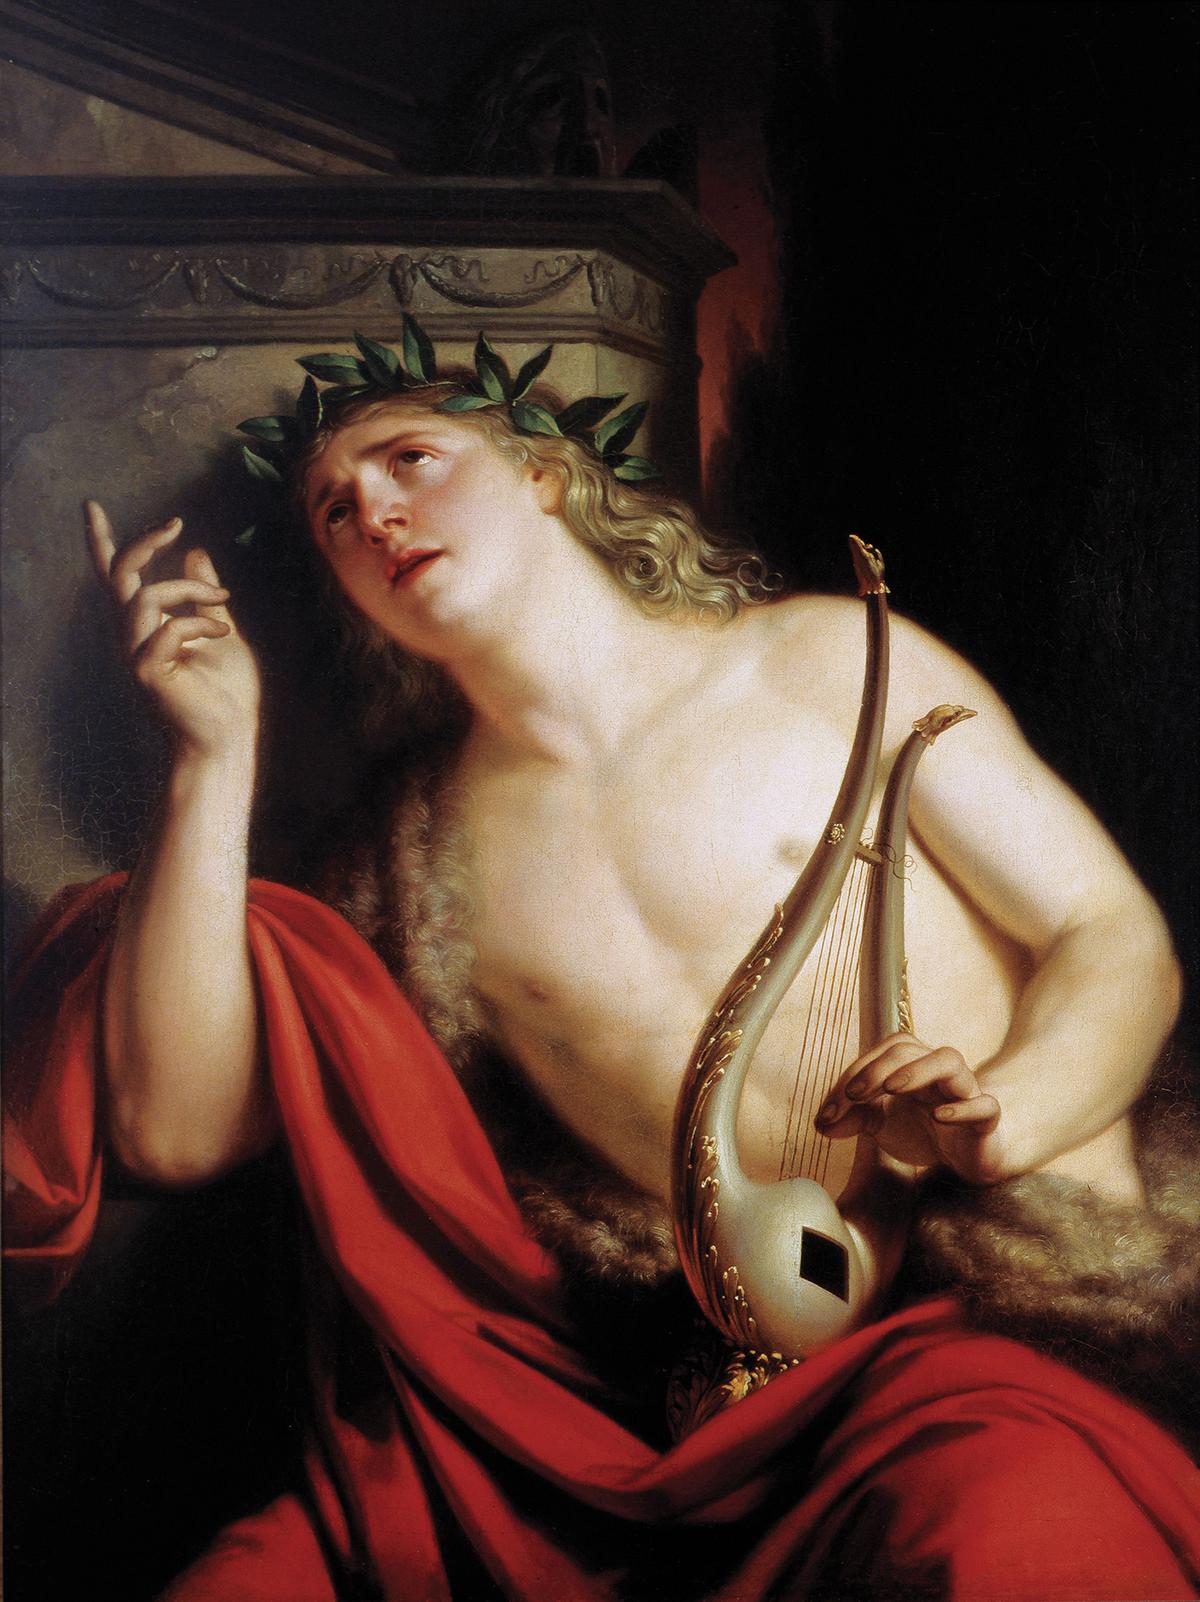 "The Lament of Orpheus," 19th century, by Franz Caucig. Oil on canvas. (Public Domain)